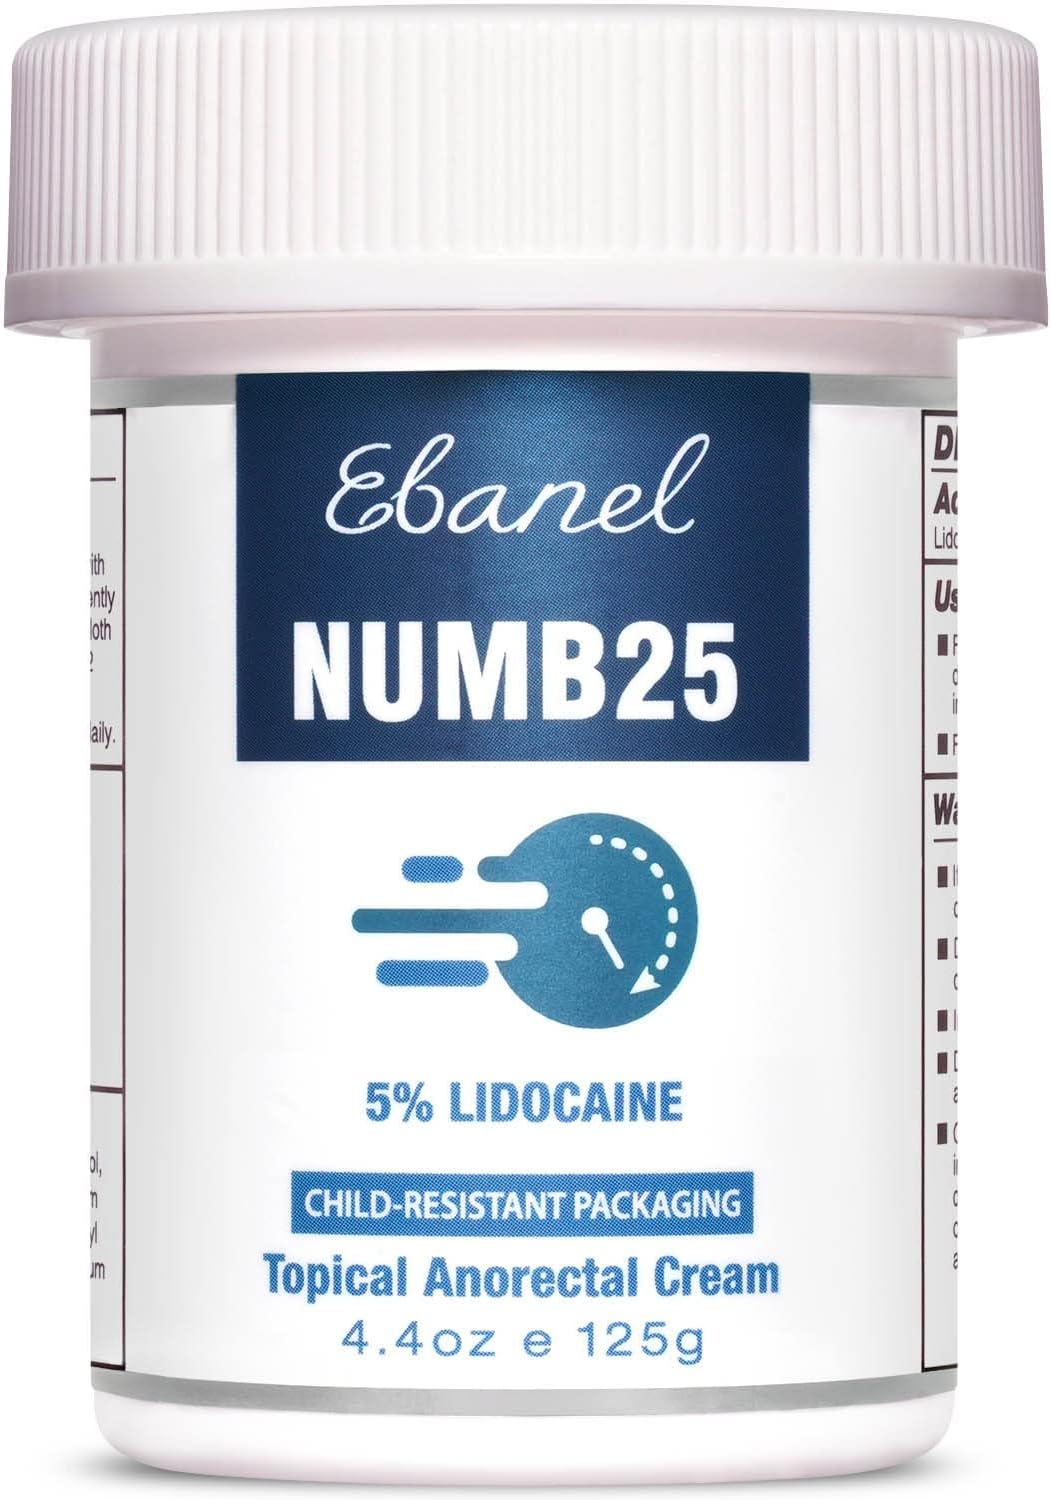 Ebanel 5% Lidocaine Numbing Cream, Pain Relief Cream Burn Itch Cream, Numb25 Topical Anesthetic Lidocaine Cream Maximum Strength with Vitamin E for Local and Anorectal Uses, Hemorrhoid Treatment